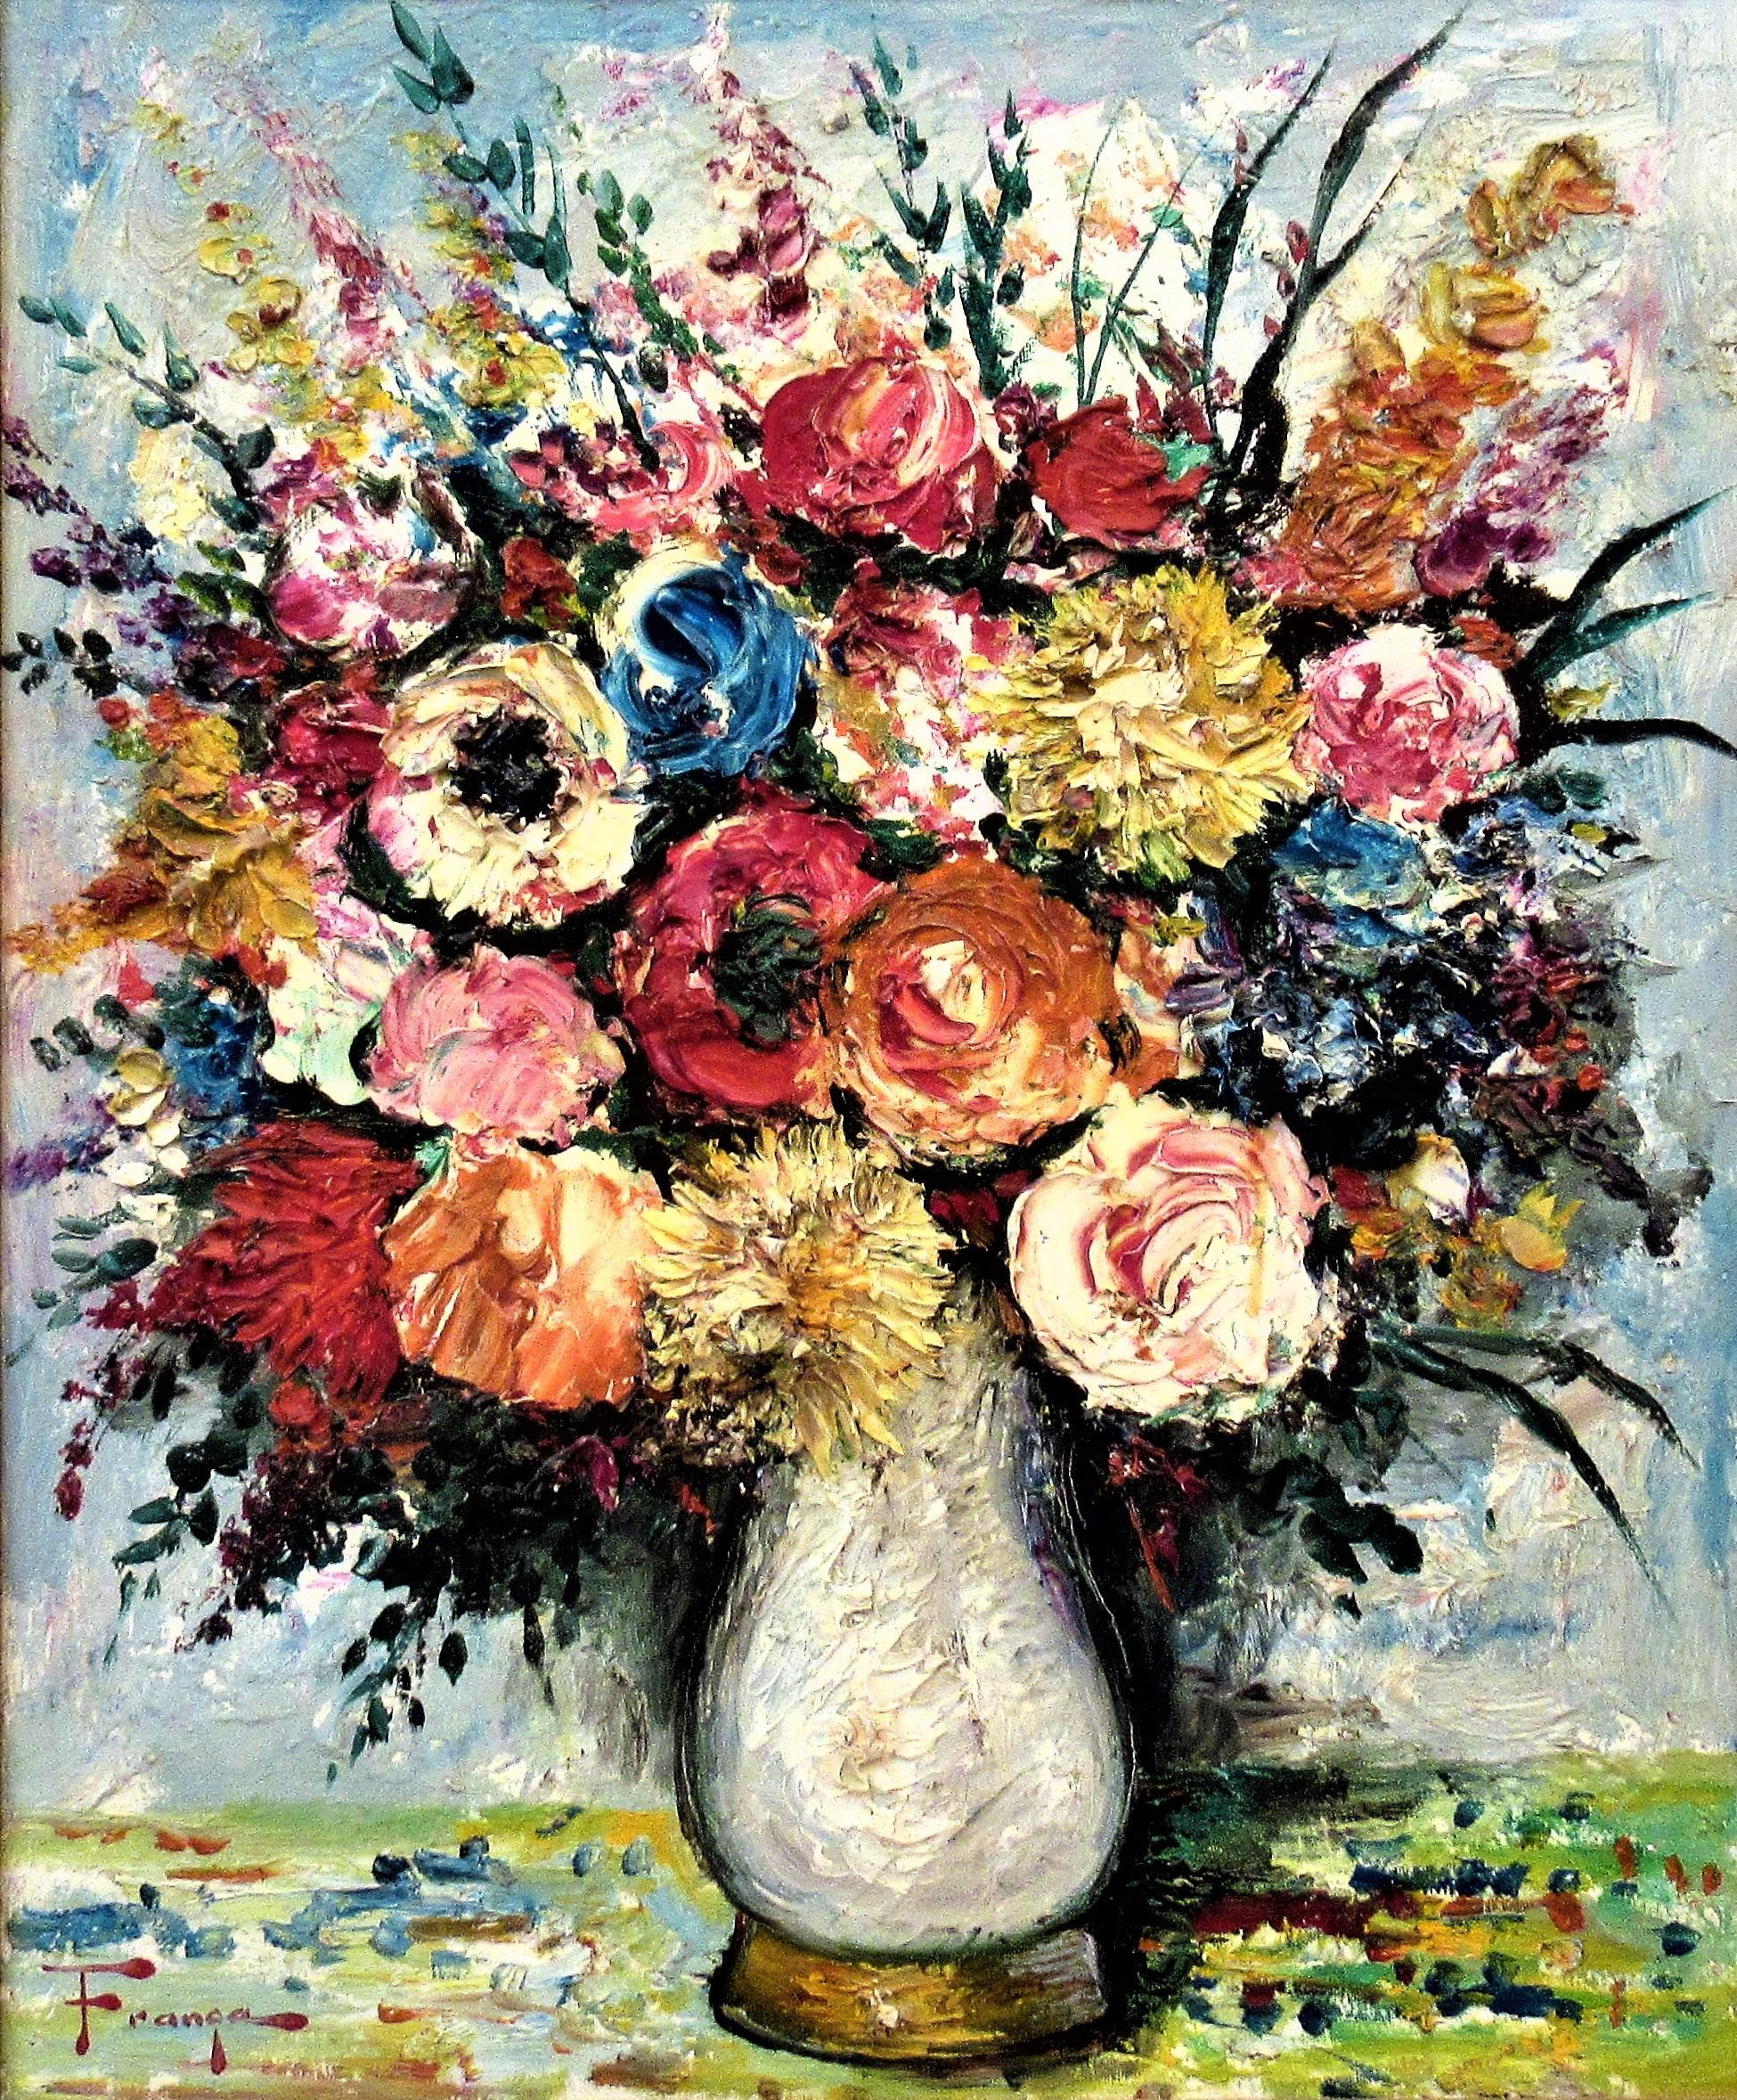 Still life Flowers in a Vase II - Painting by Ozz Franca